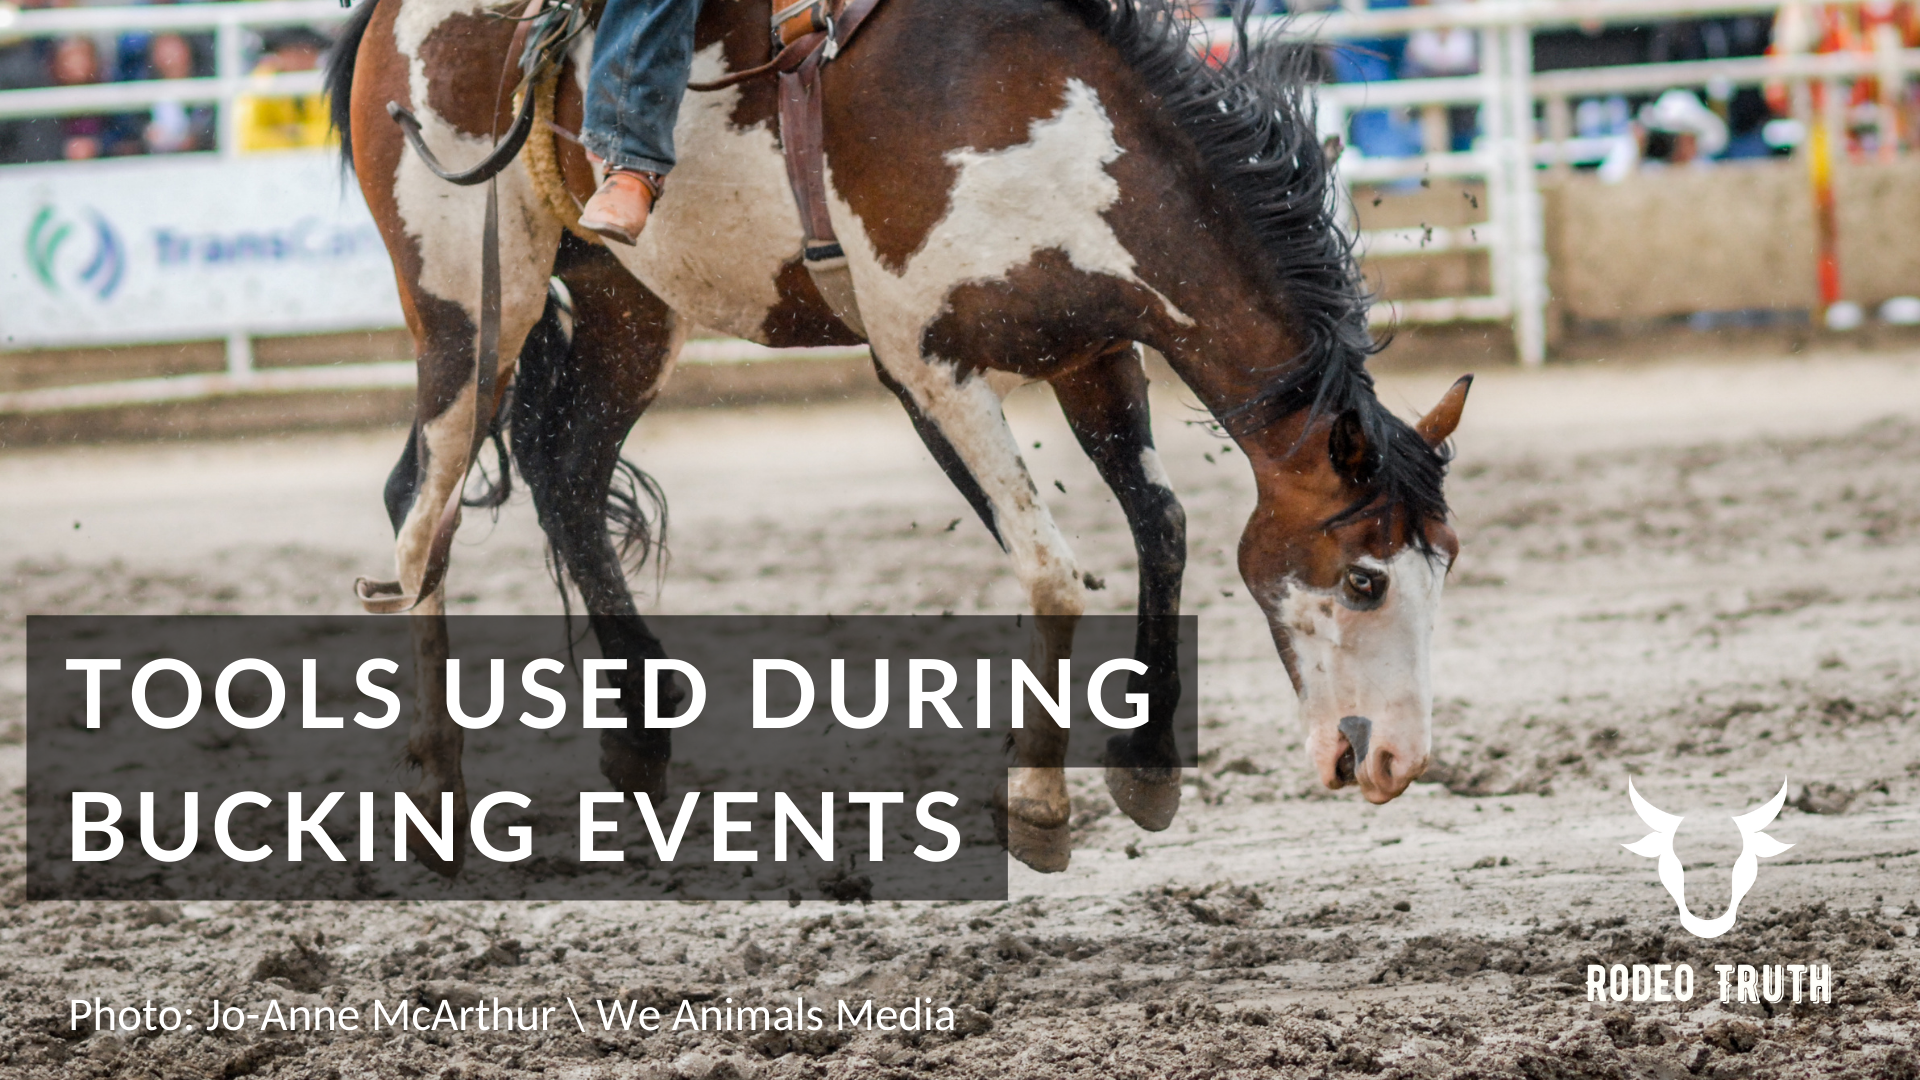 A horse bucks during a Calgary Stampede rodeo event with a text overlay reading "Tools used during bucking events"